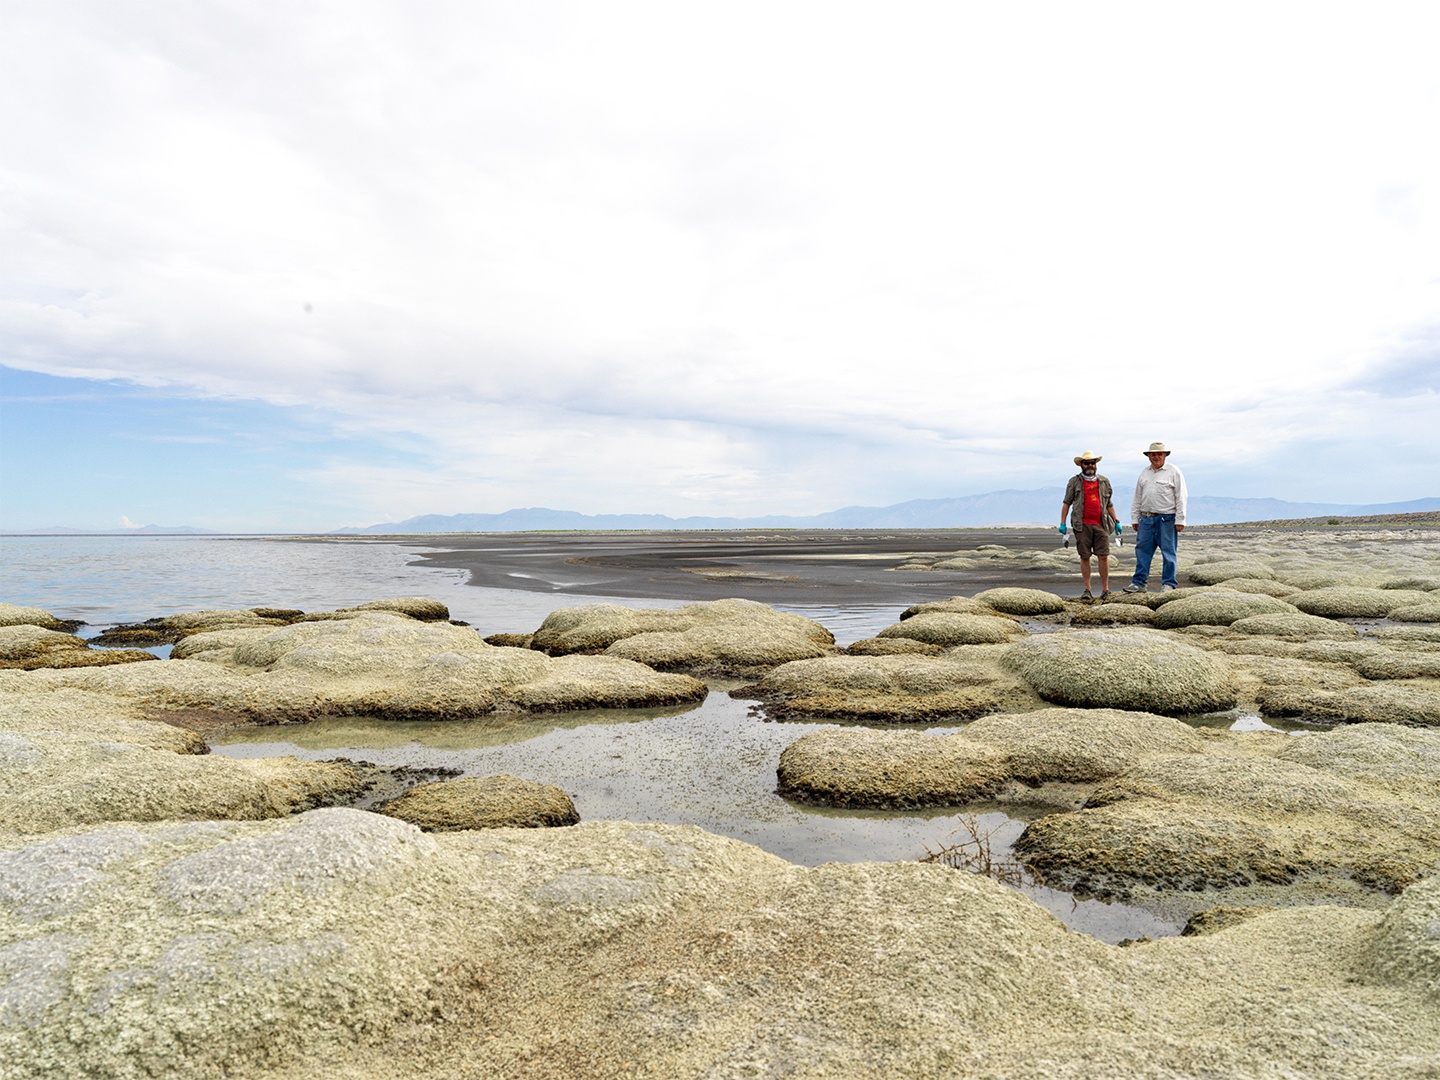 With the Great Salt Lake and mountains behind them, Dr. James Metcalf and Dr. Paul Alan Cox stand on greenish mounds of cyanobacteria.